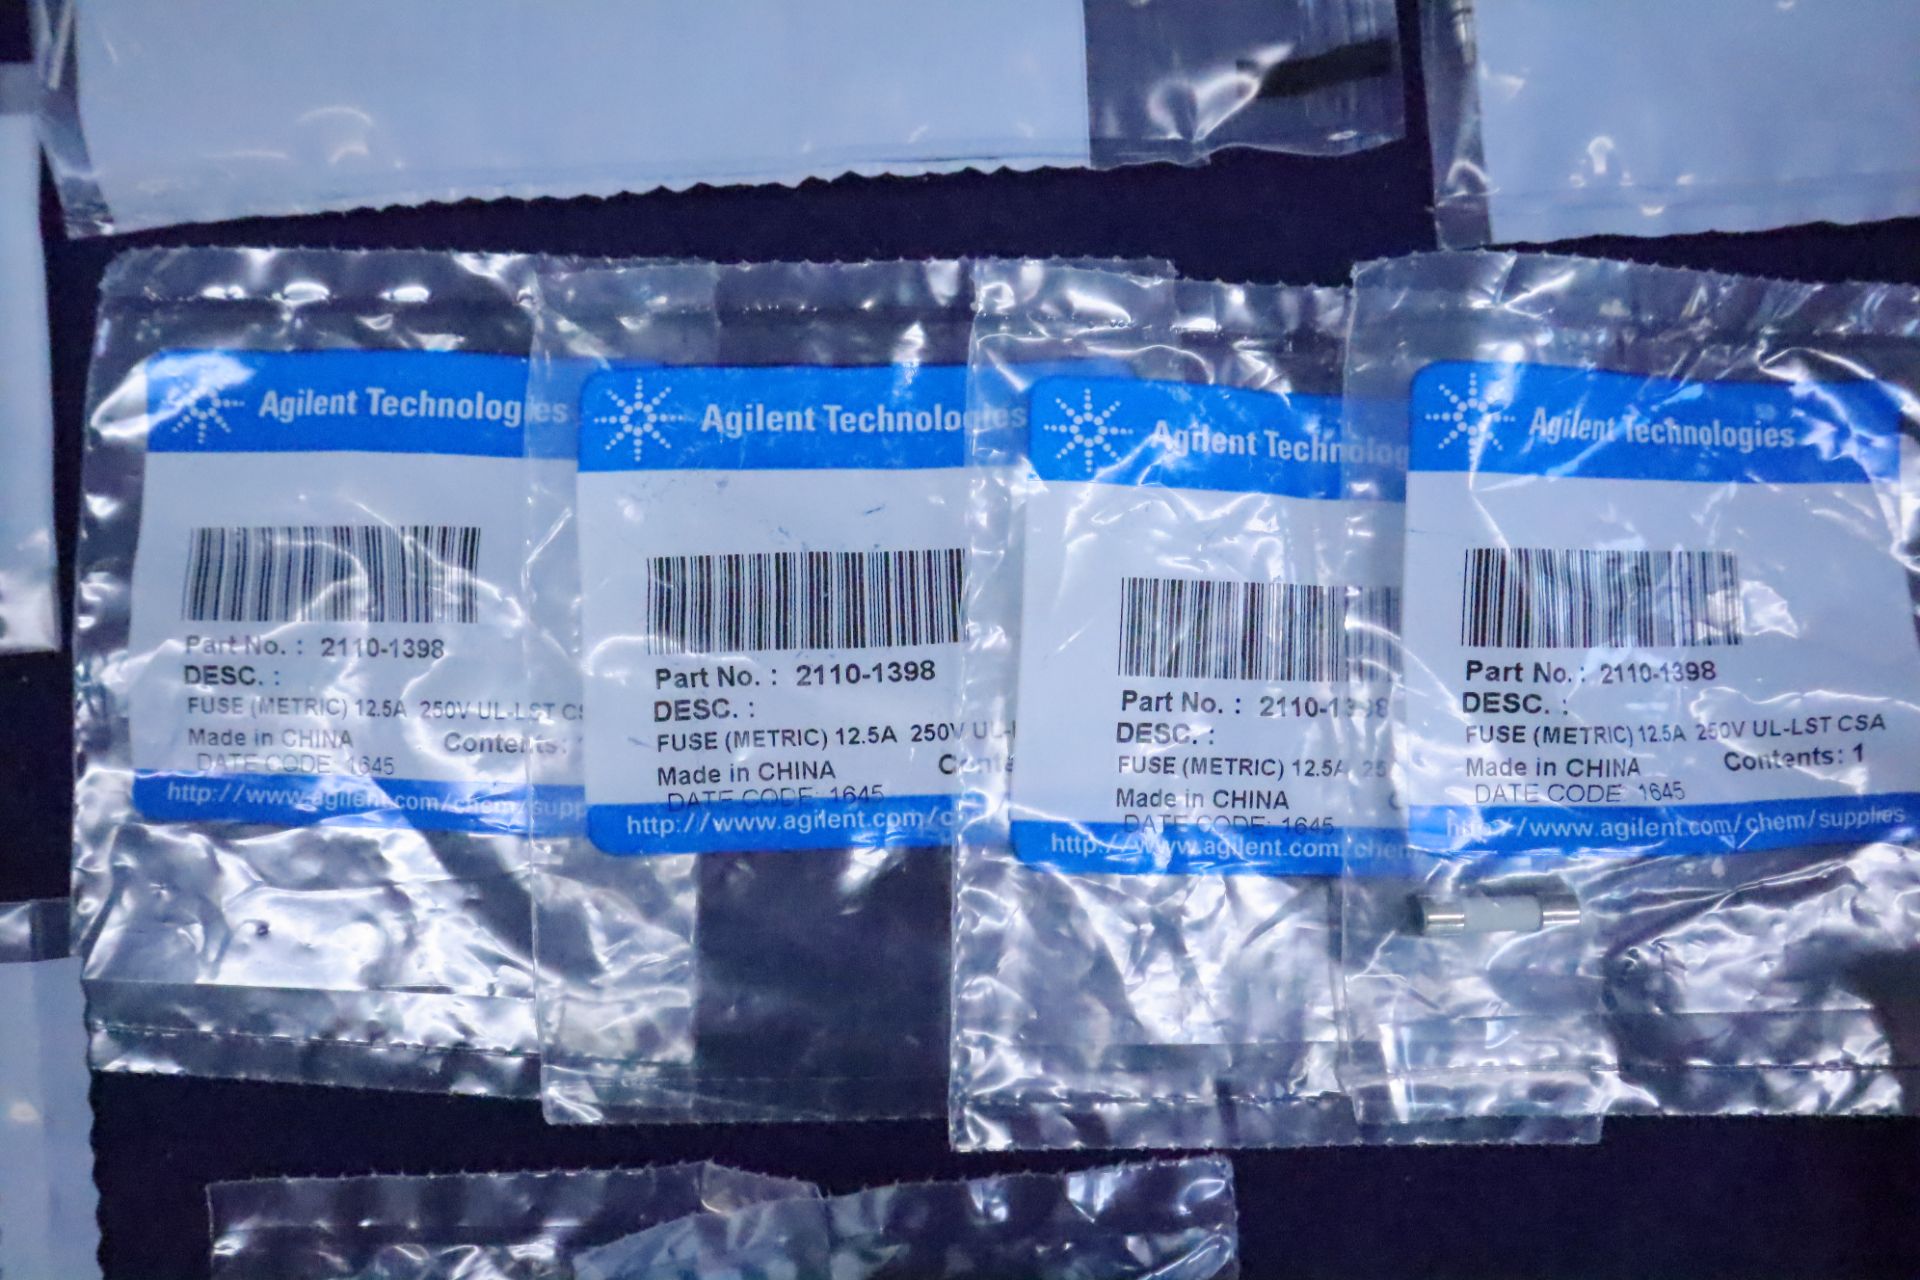 UPDATED PHOTOS Agilent Technologies OEM Replacement Parts and tool kits for LC/MS Machines - Image 30 of 37